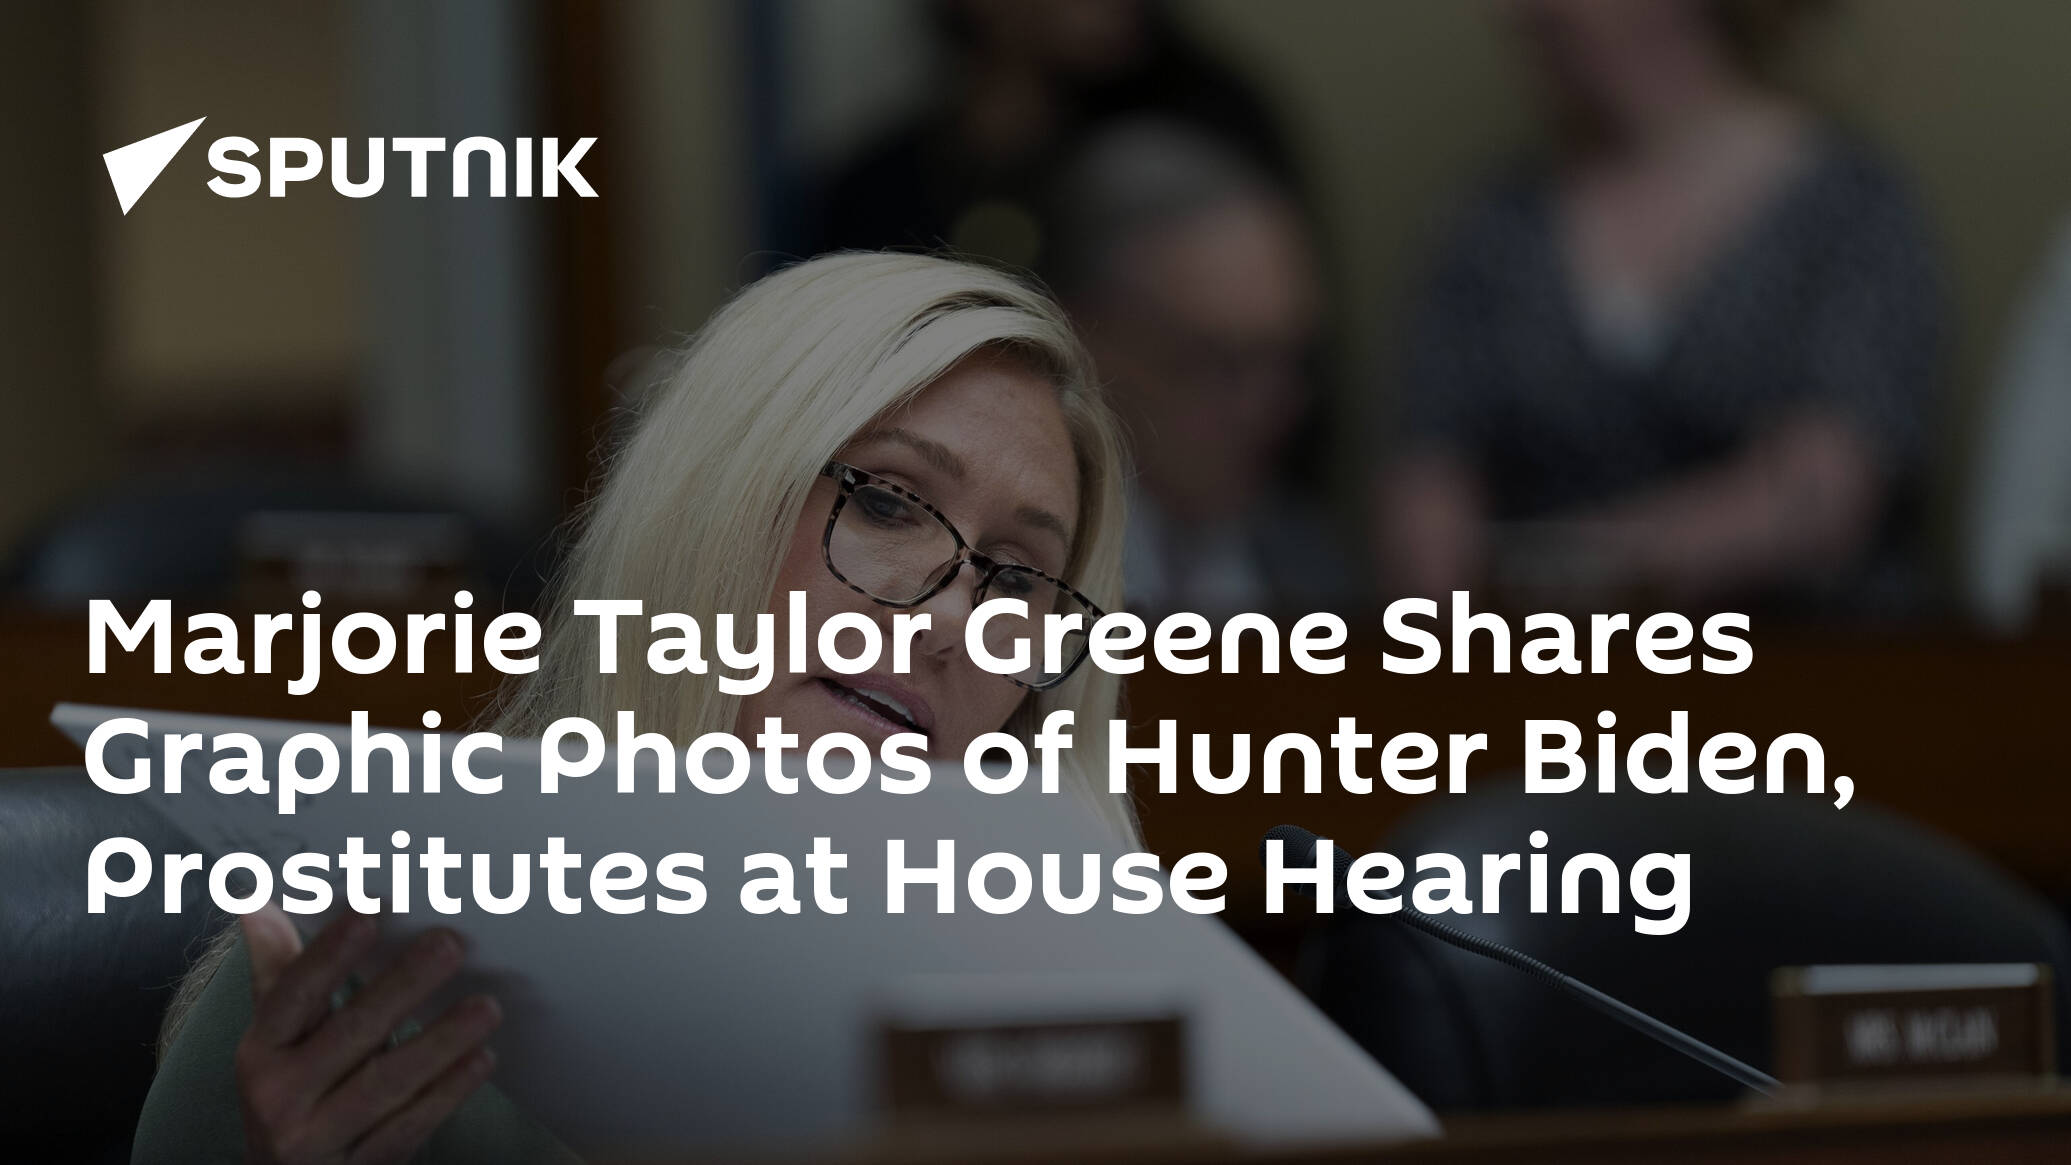 Marjorie Taylor Greene Shares Graphic Photos of Hunter Biden, Prostitutes at House Hearing